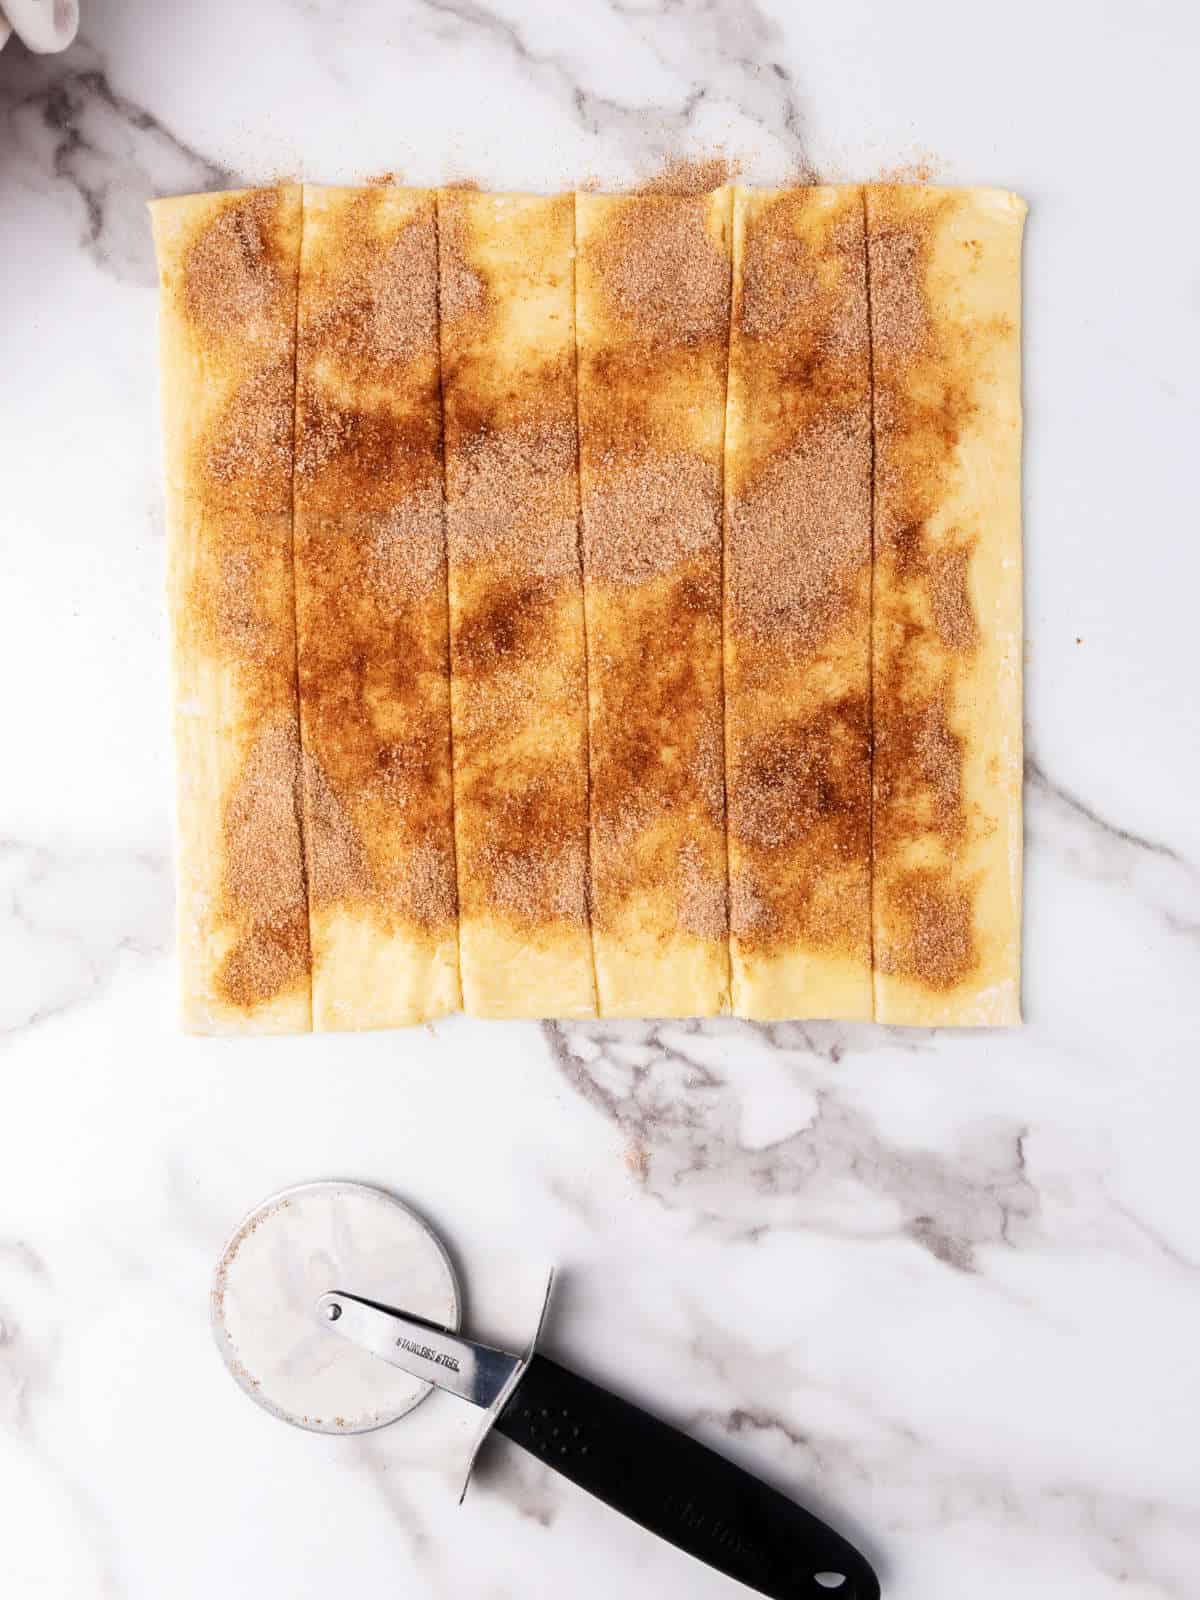 puff pastry sprinkled with cinnamon sugar and cut into strips.